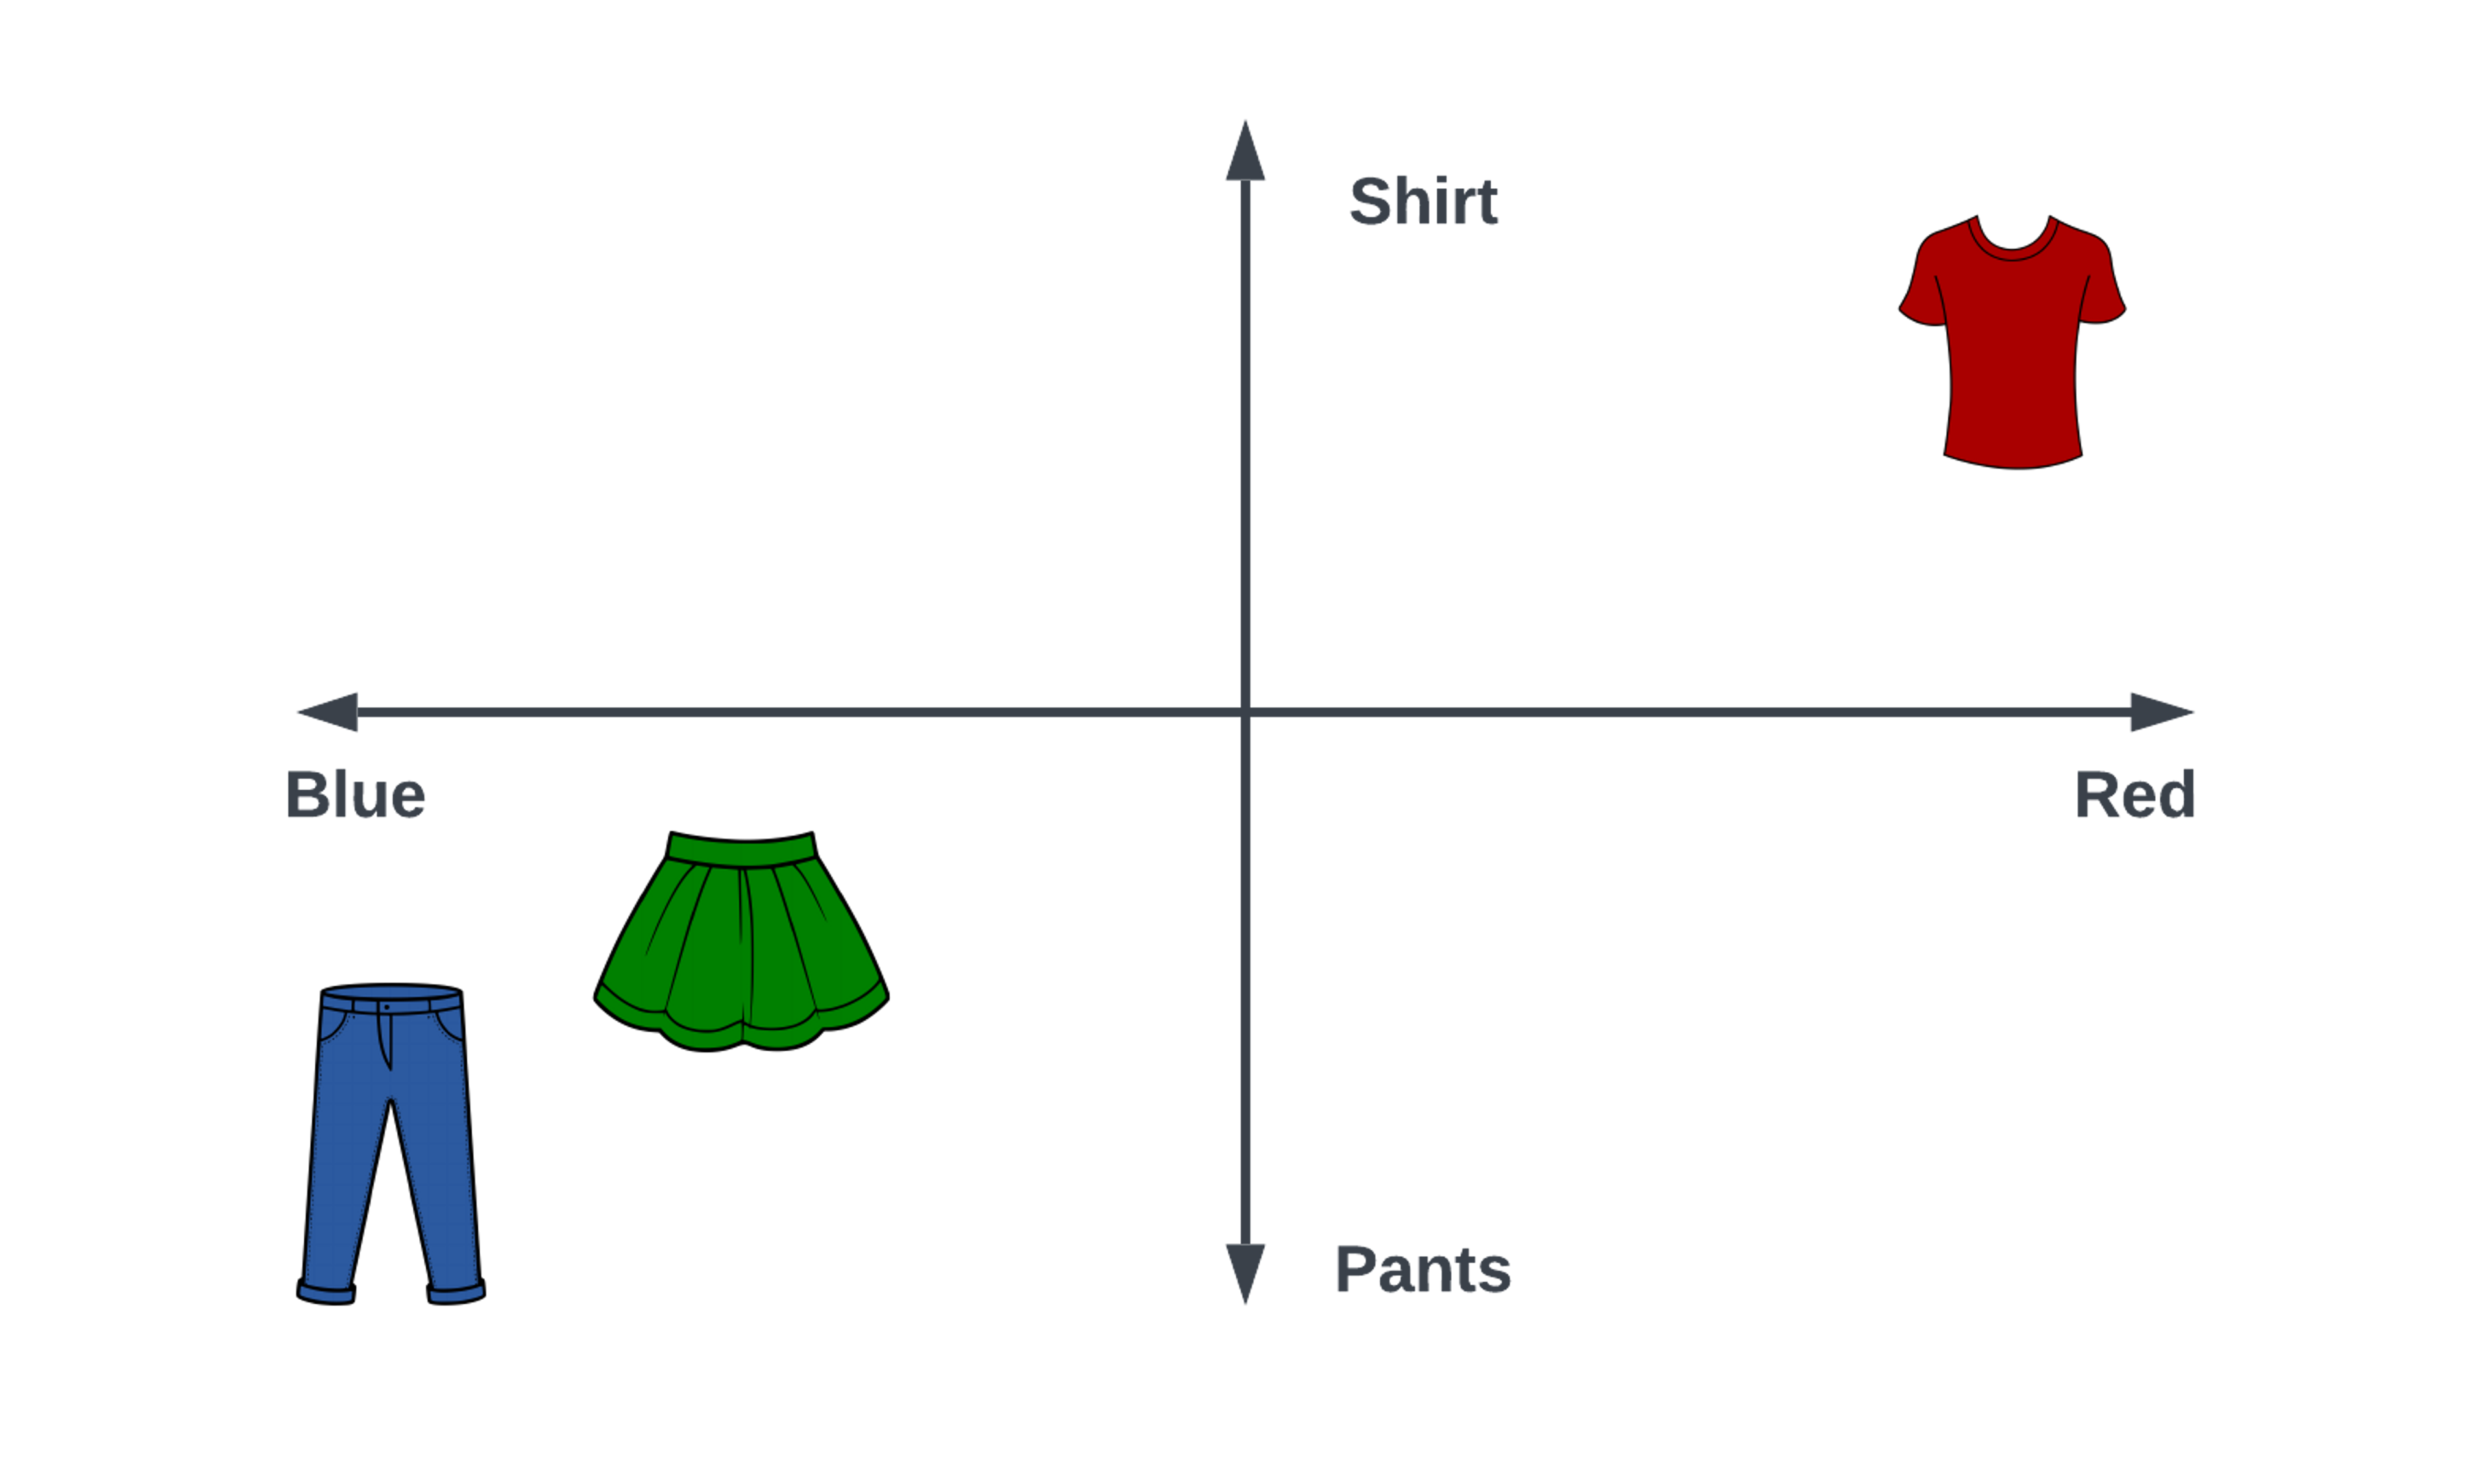 A 2-dimensional embedding space for clothes